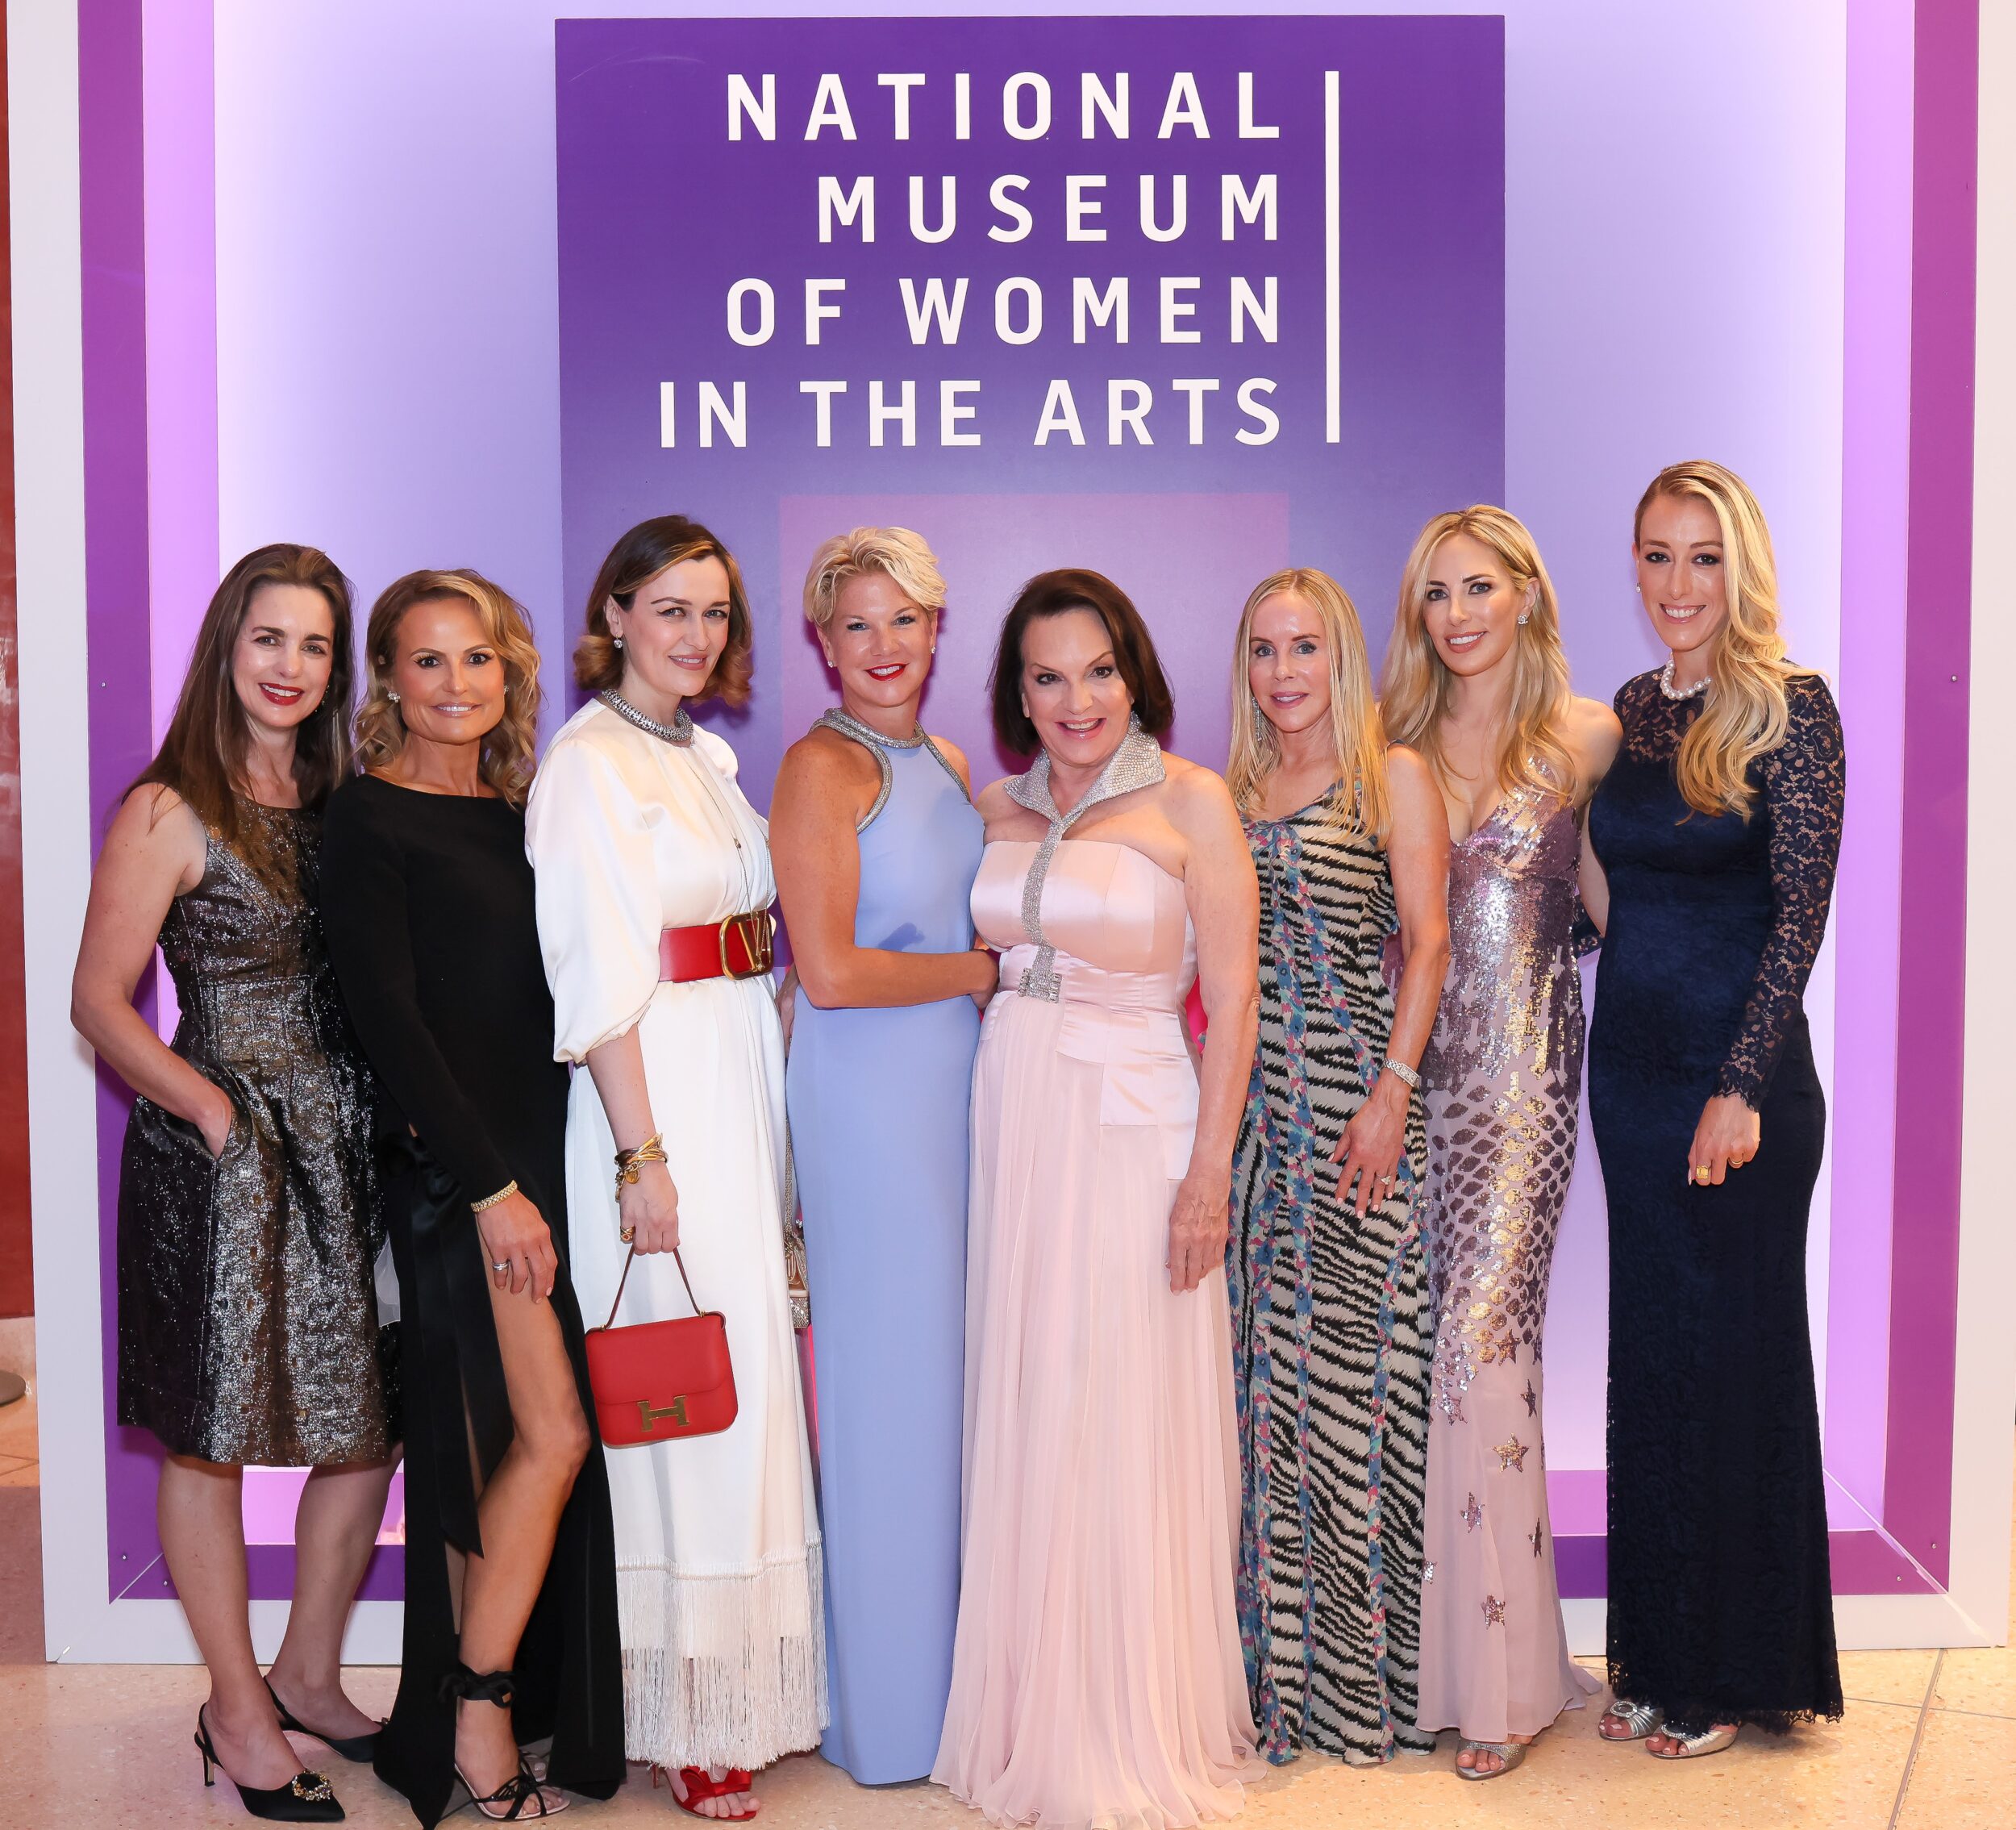 A group of light-skinned women pose for a photo at a black-tie event. Behind the women is a colorful backdrop with the National Museum of Women in the Arts logo on it.